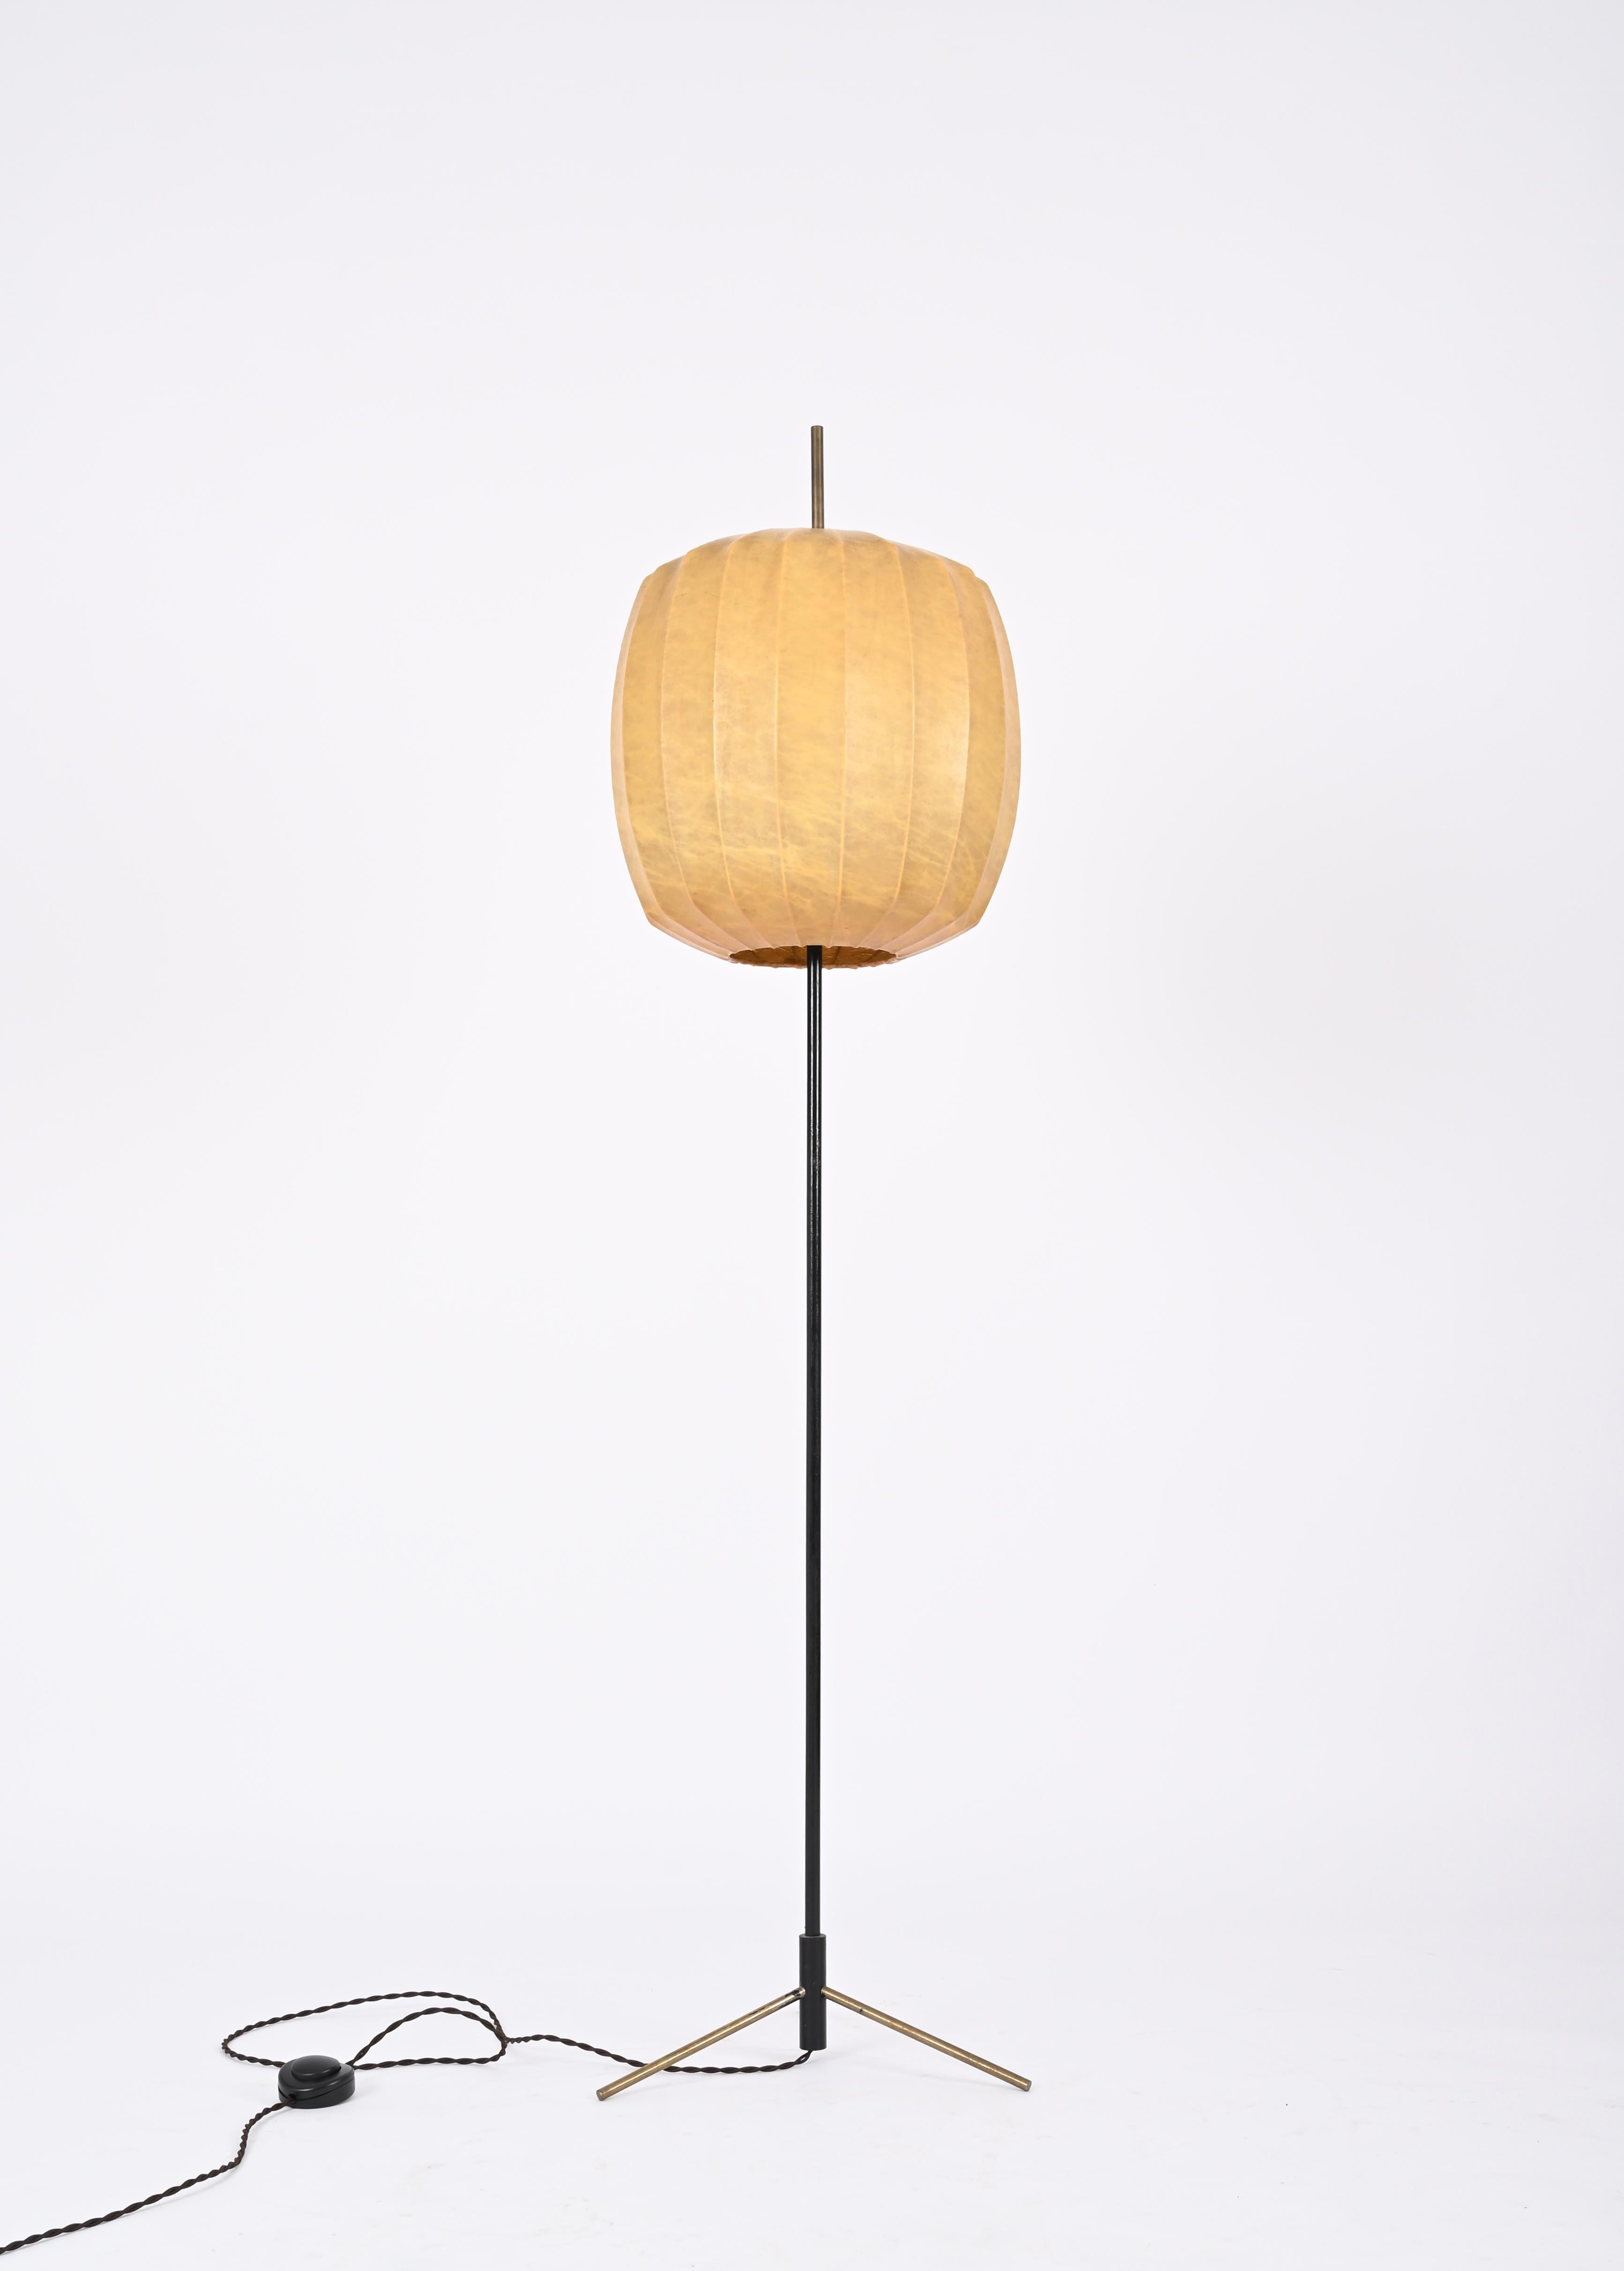 Midcentury Beige Cocoon Floor Lamp in Brass and Metal, Castiglioni, Italy 1960s For Sale 9